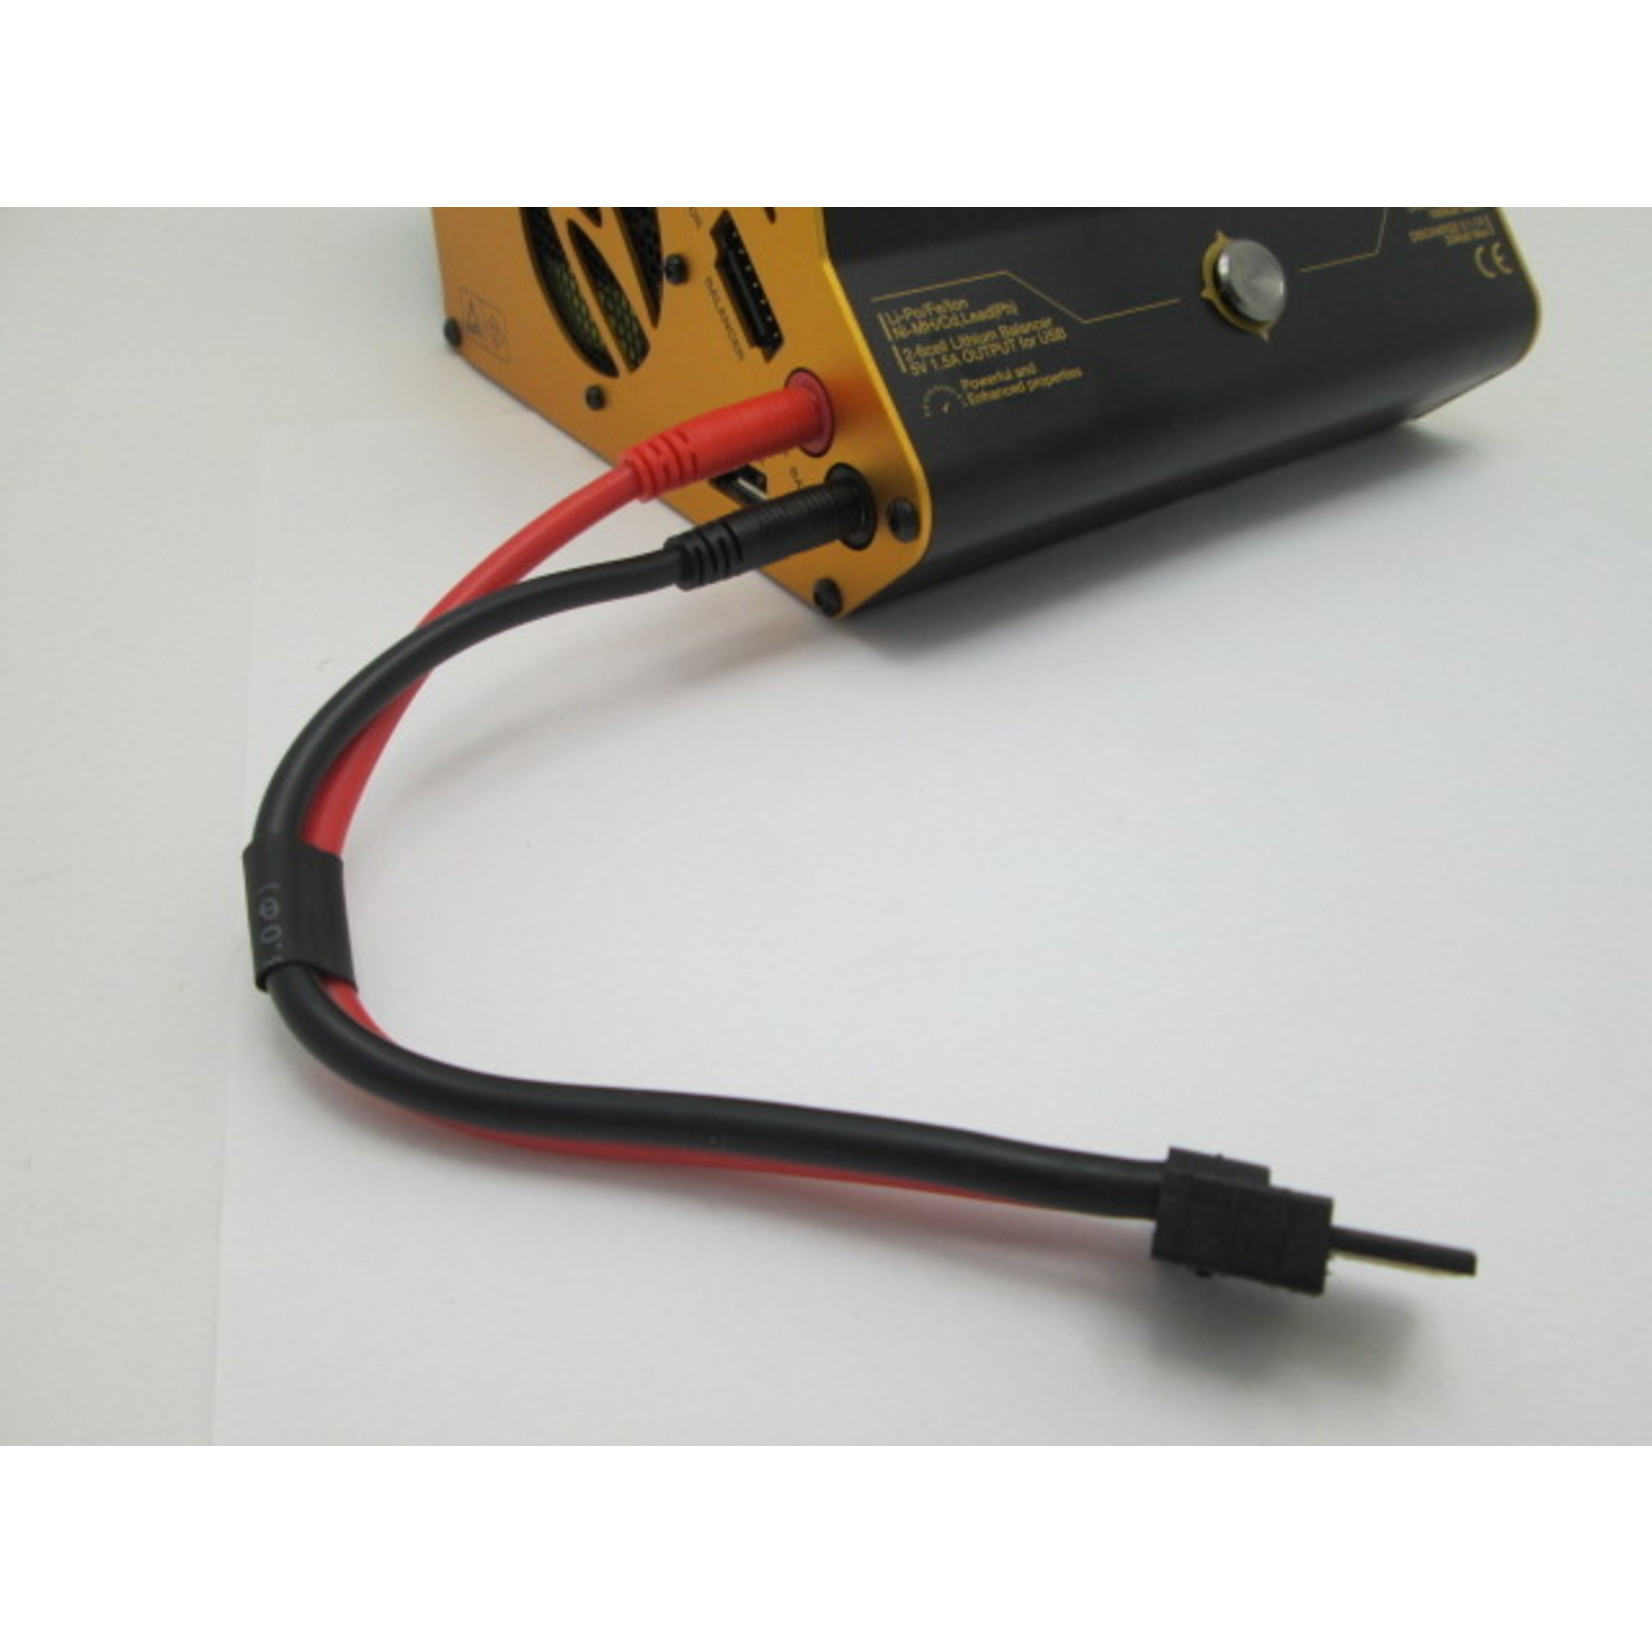 SMC SMC 4mm to Traxxas Charger Adapter #2002